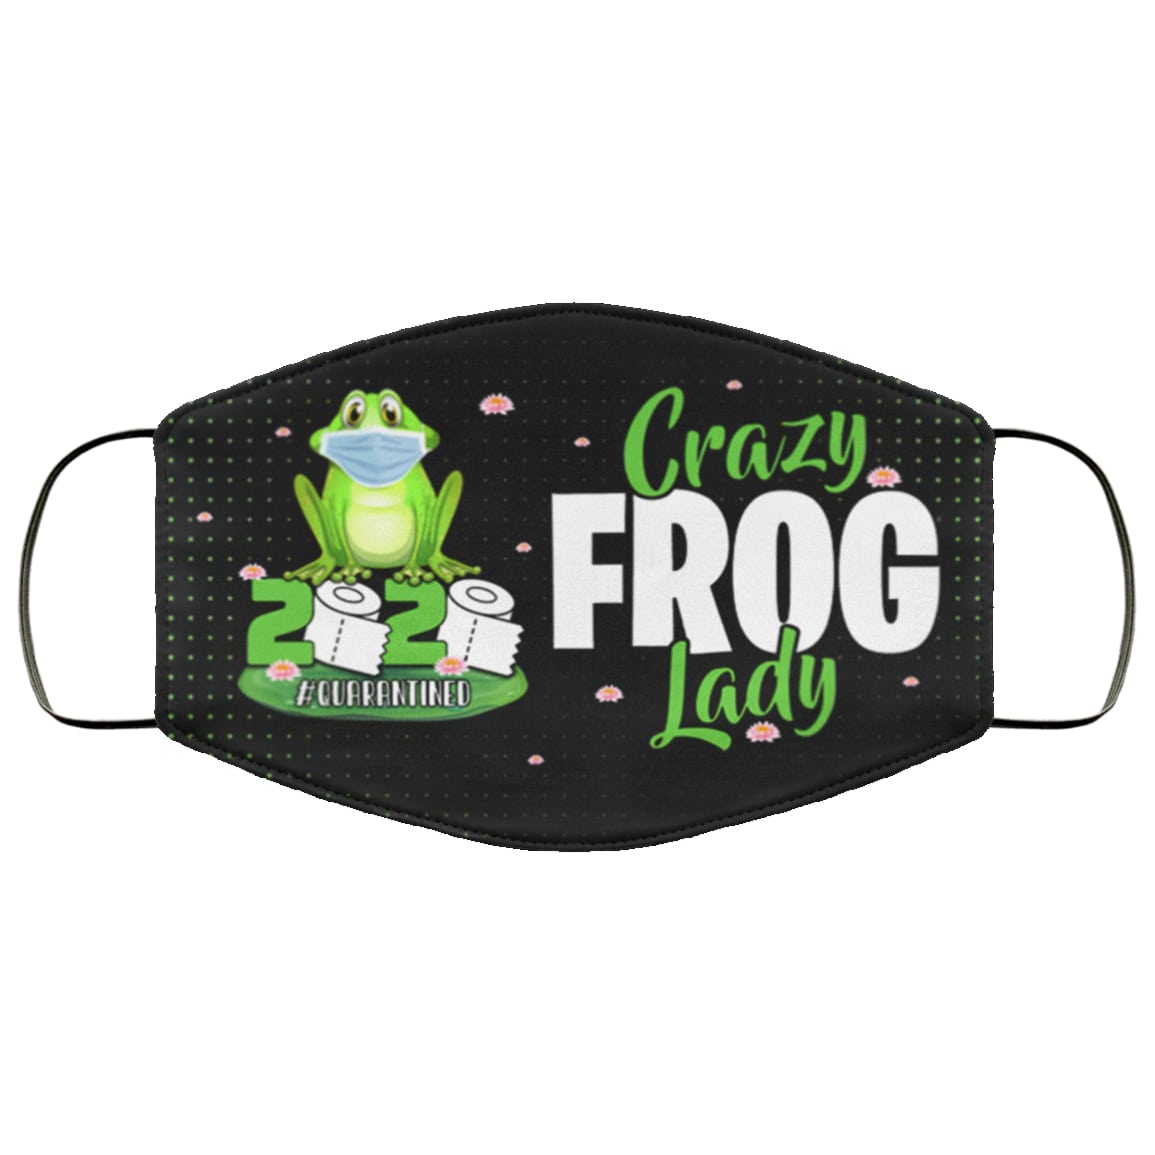 Crazy frog lady 2020 quarantined anti pollution face mask